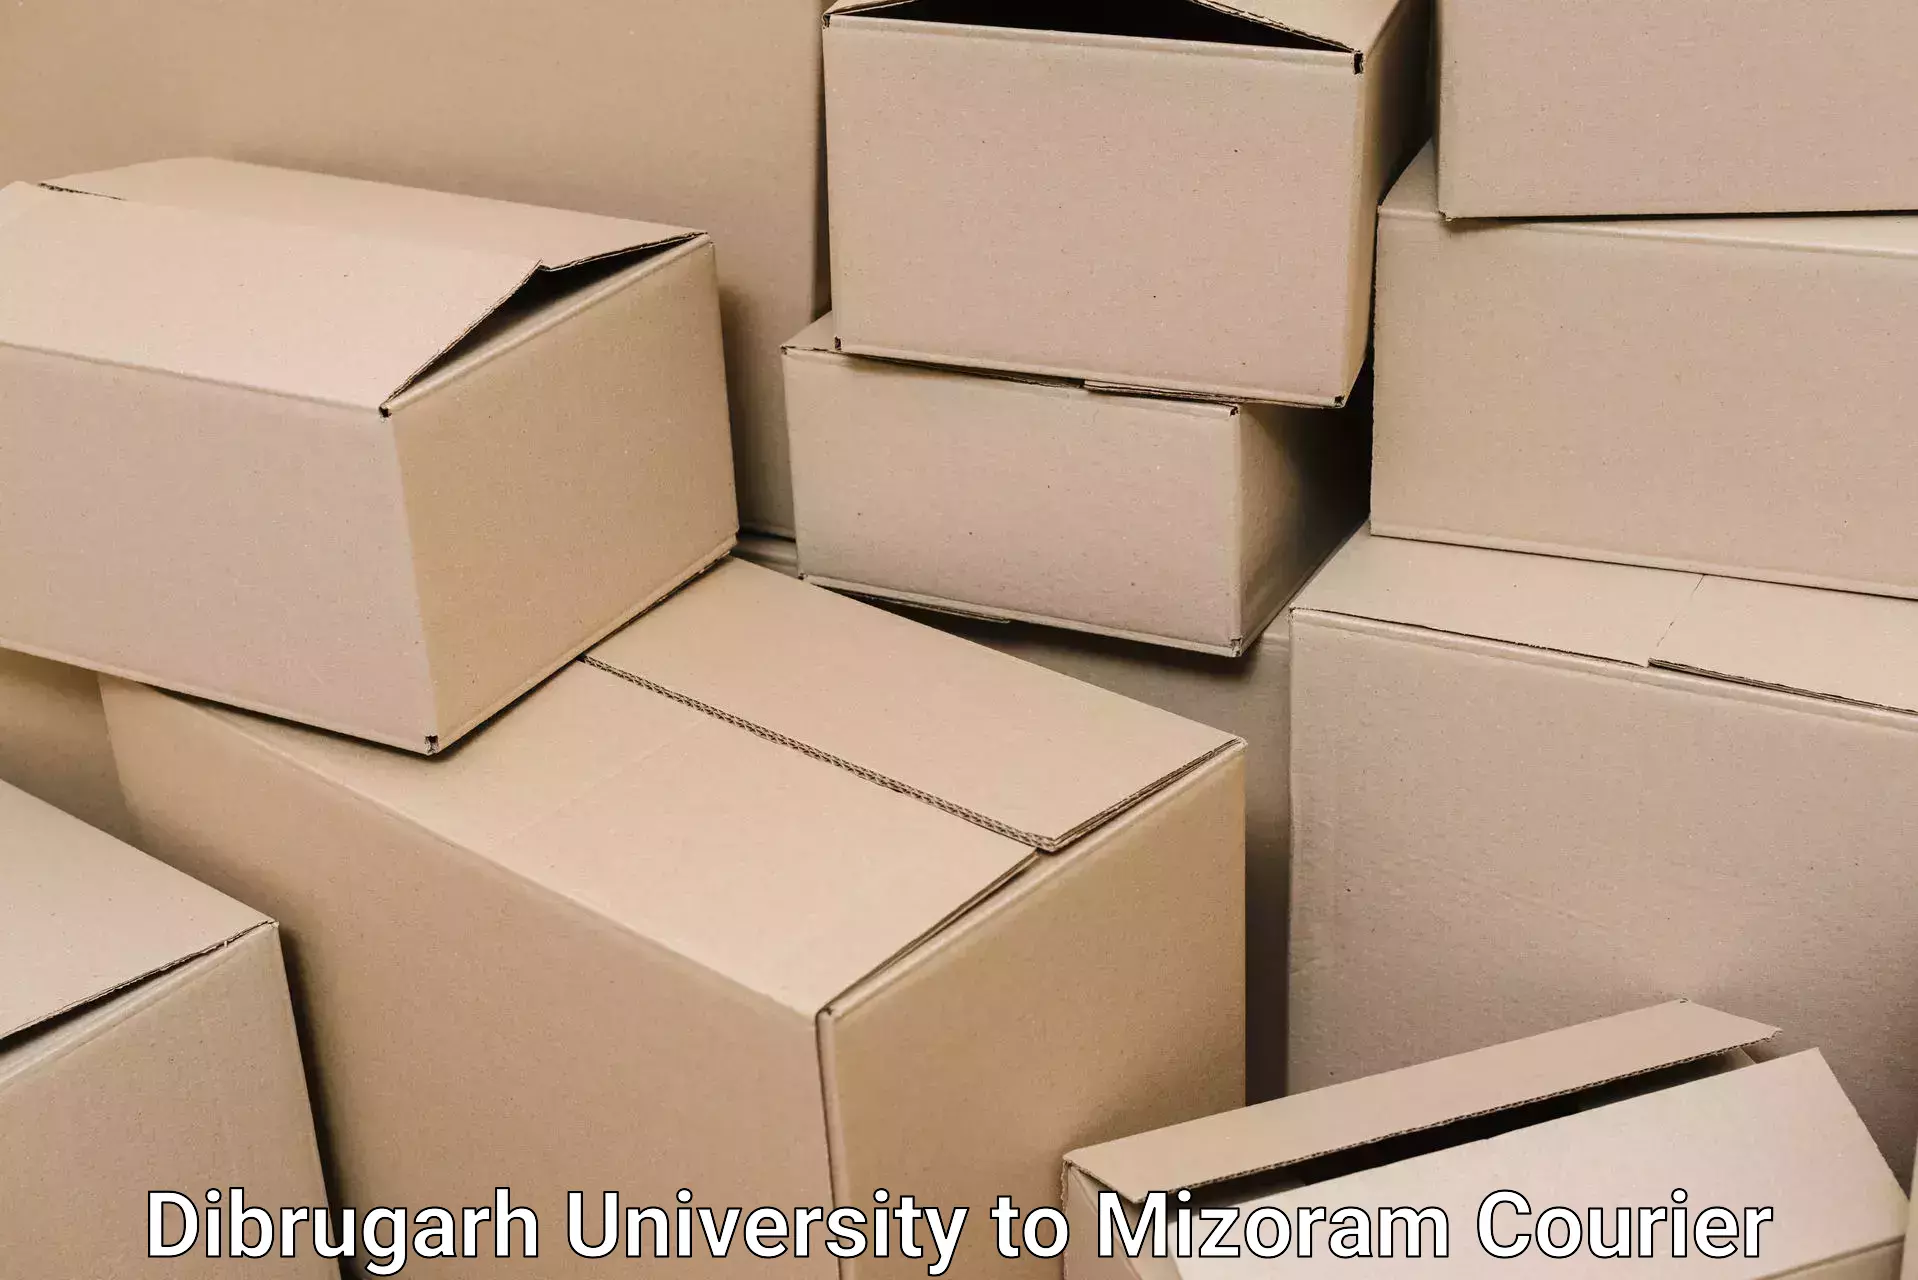 Home goods moving company Dibrugarh University to Lawngtlai